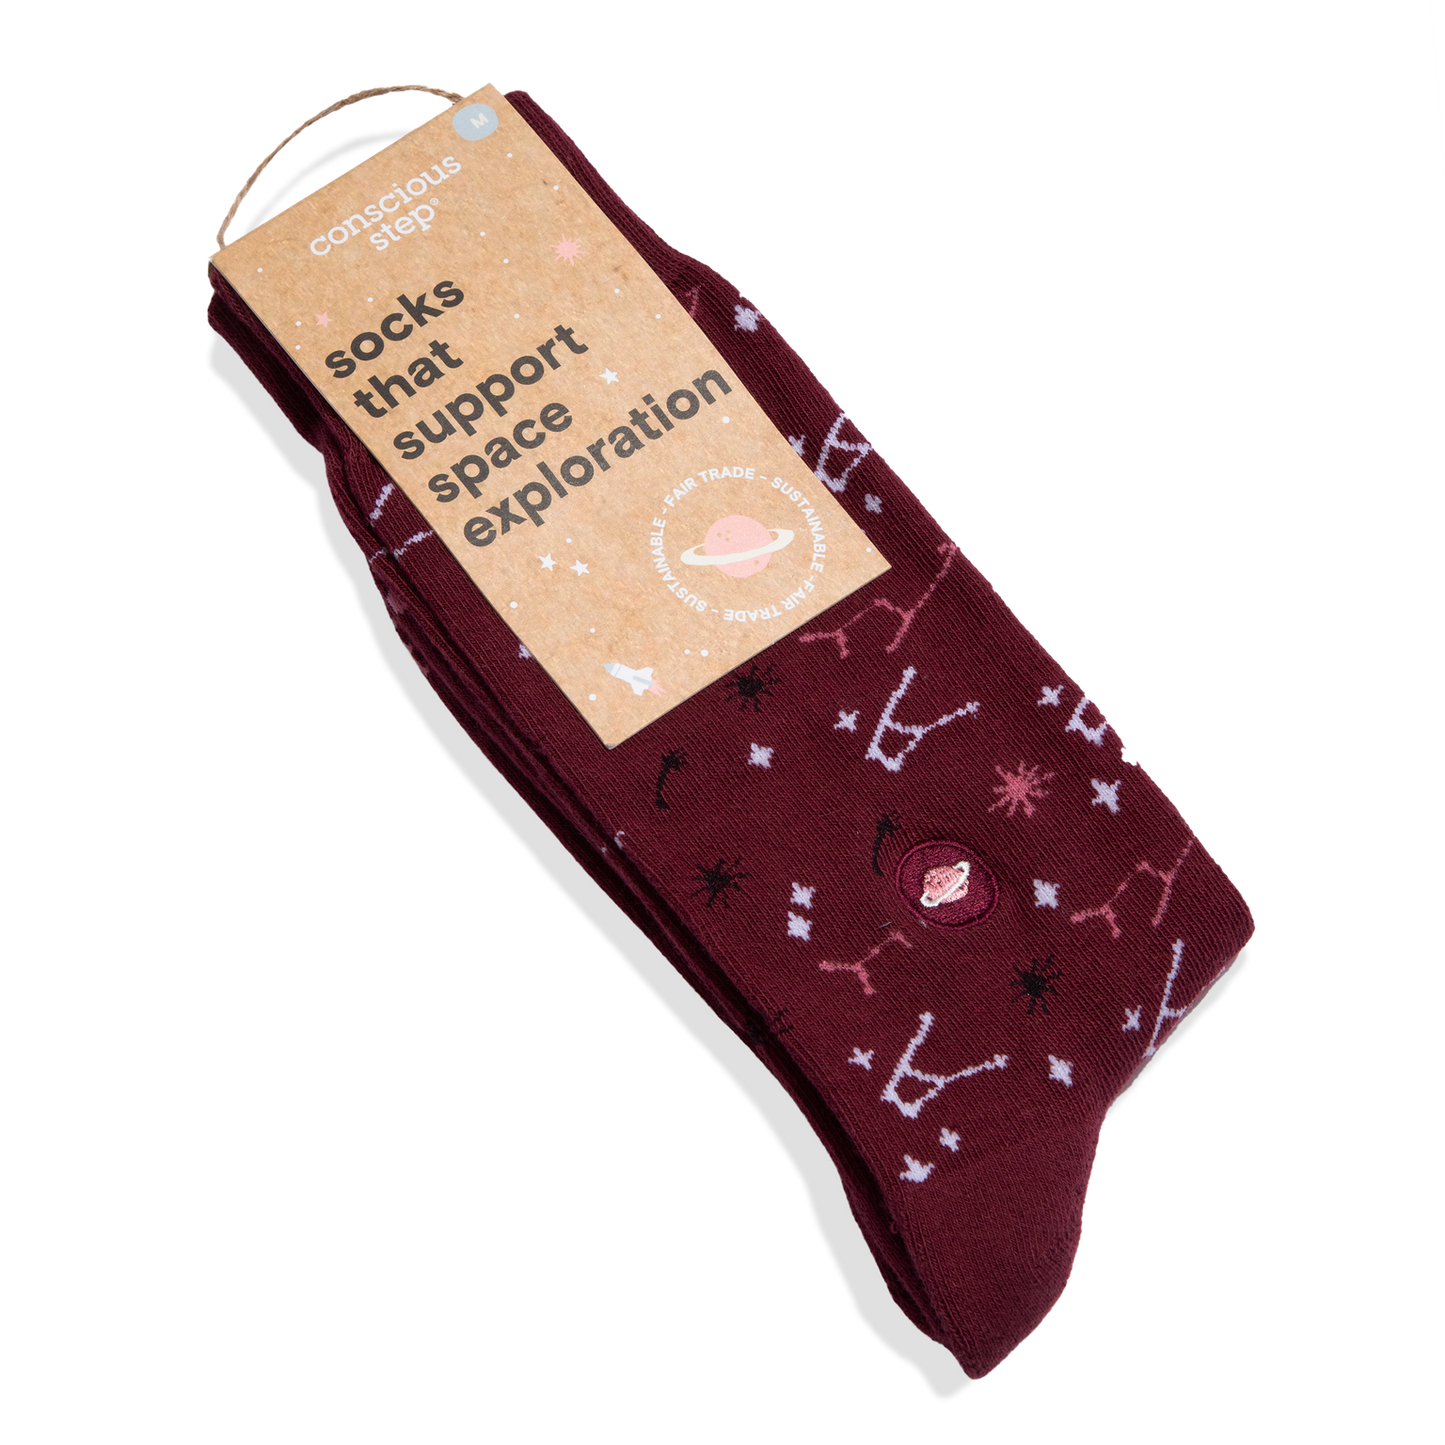 Socks that Support Space Exploration (Maroon Constellations): Small